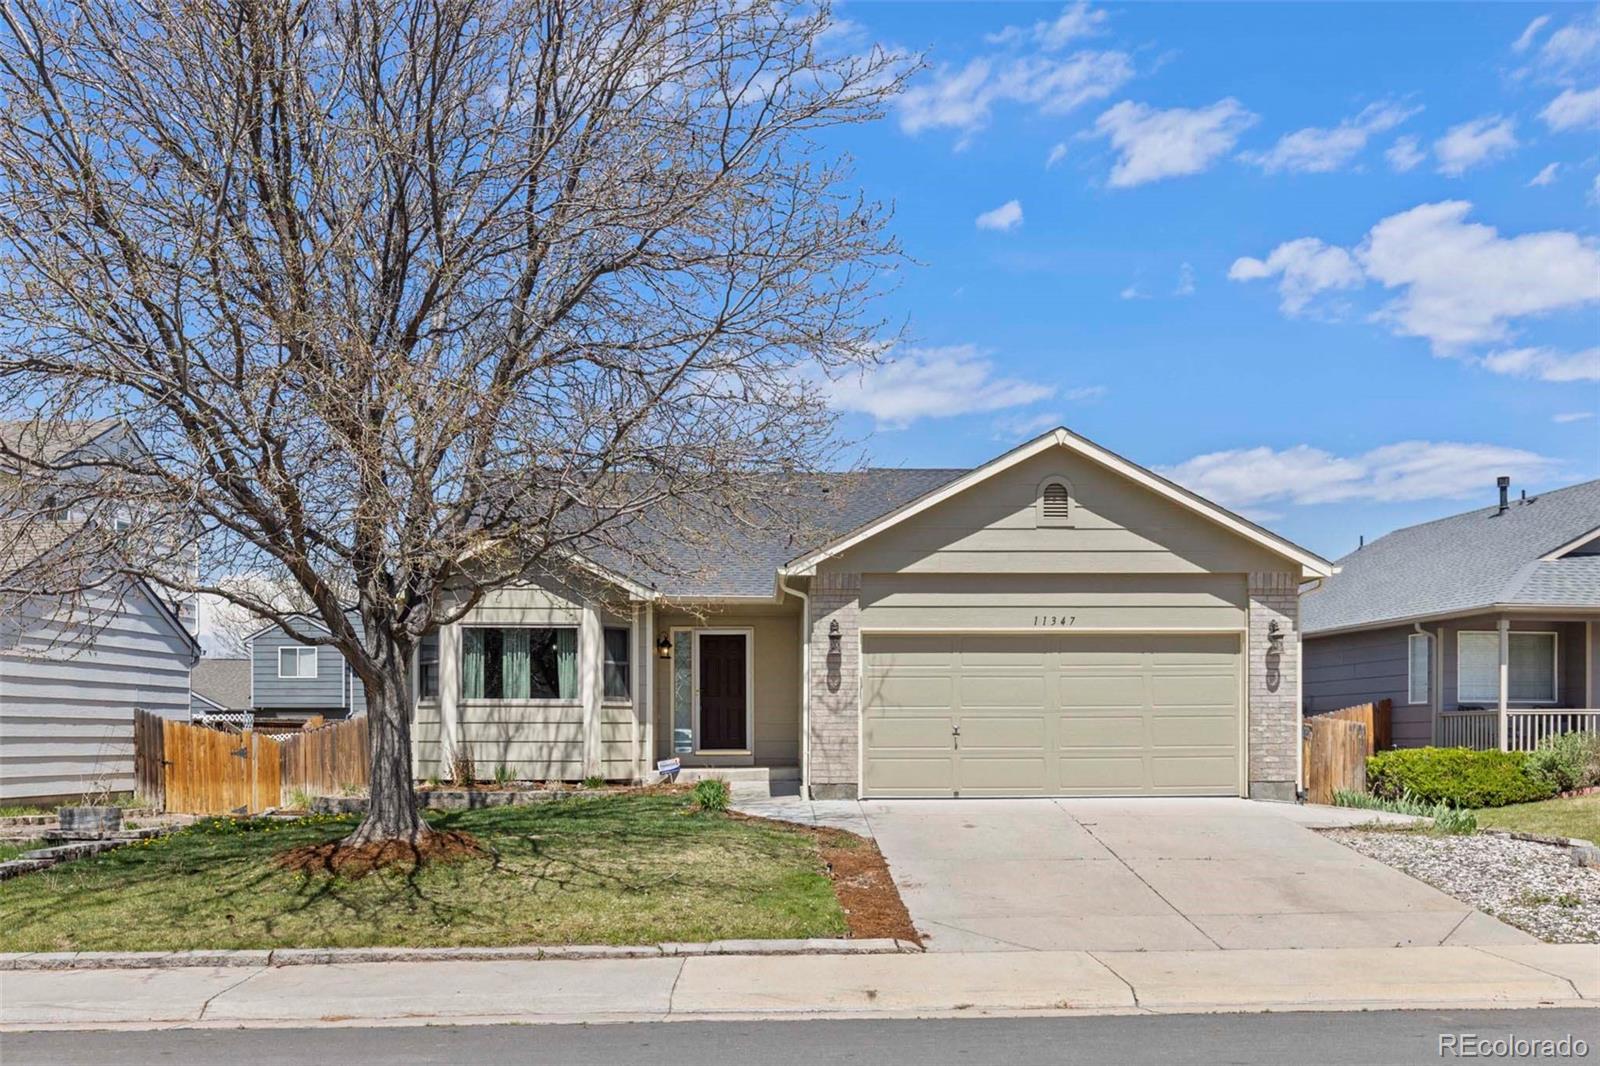 11347 e 116th avenue, commerce city sold home. Closed on 2024-05-24 for $515,000.